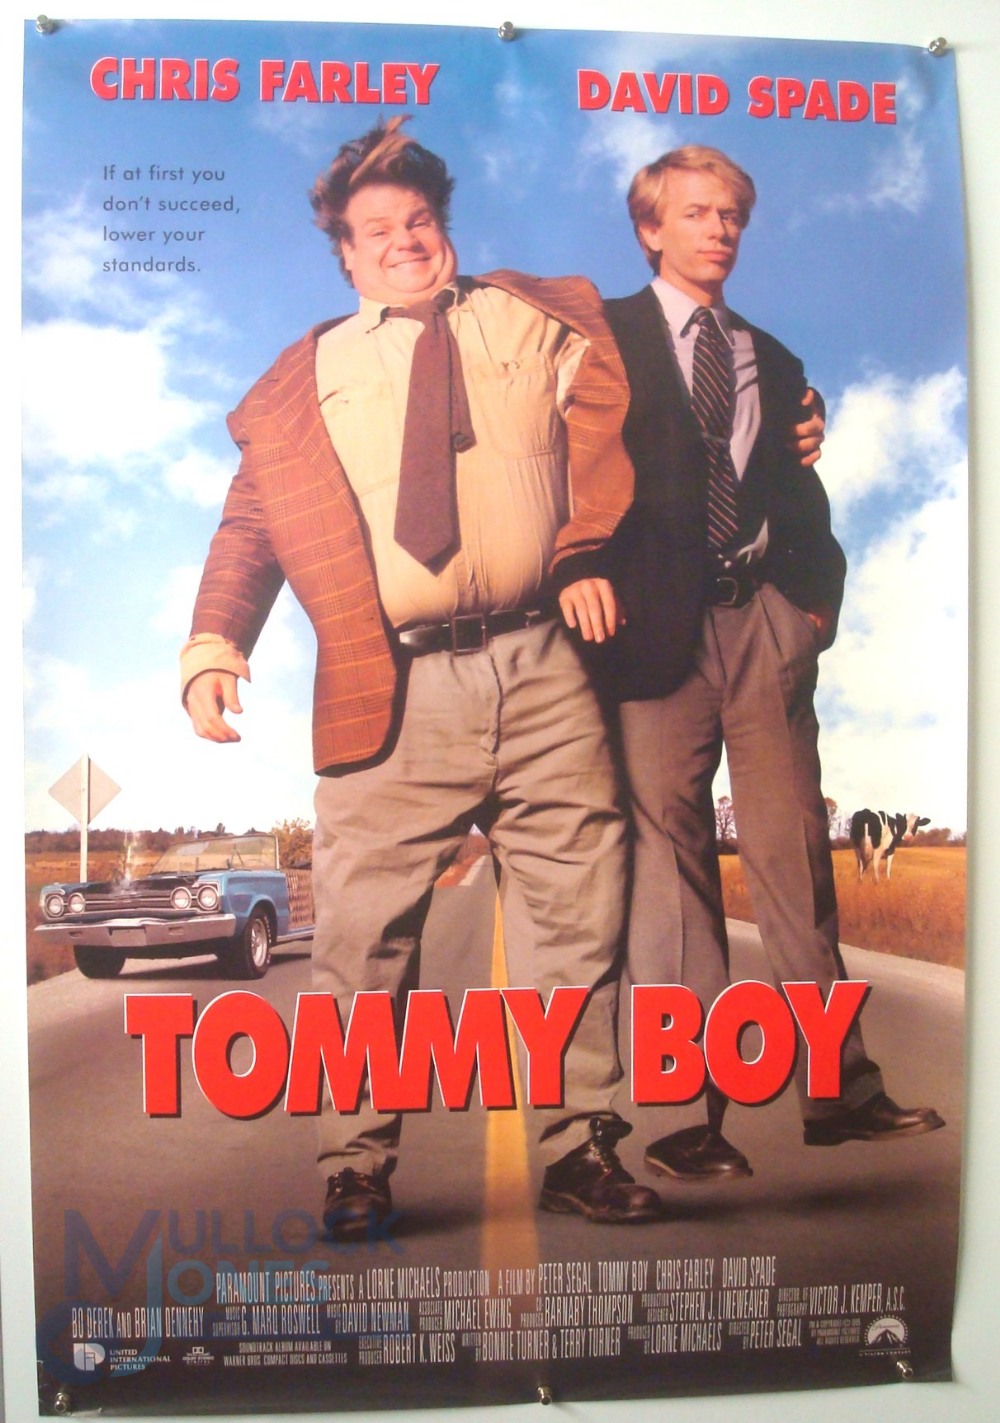 4 Original Movie/Film Posters - Tommy Boy, Apollo 13, A Walk in the Clouds, Bushwhacked - 40x30"